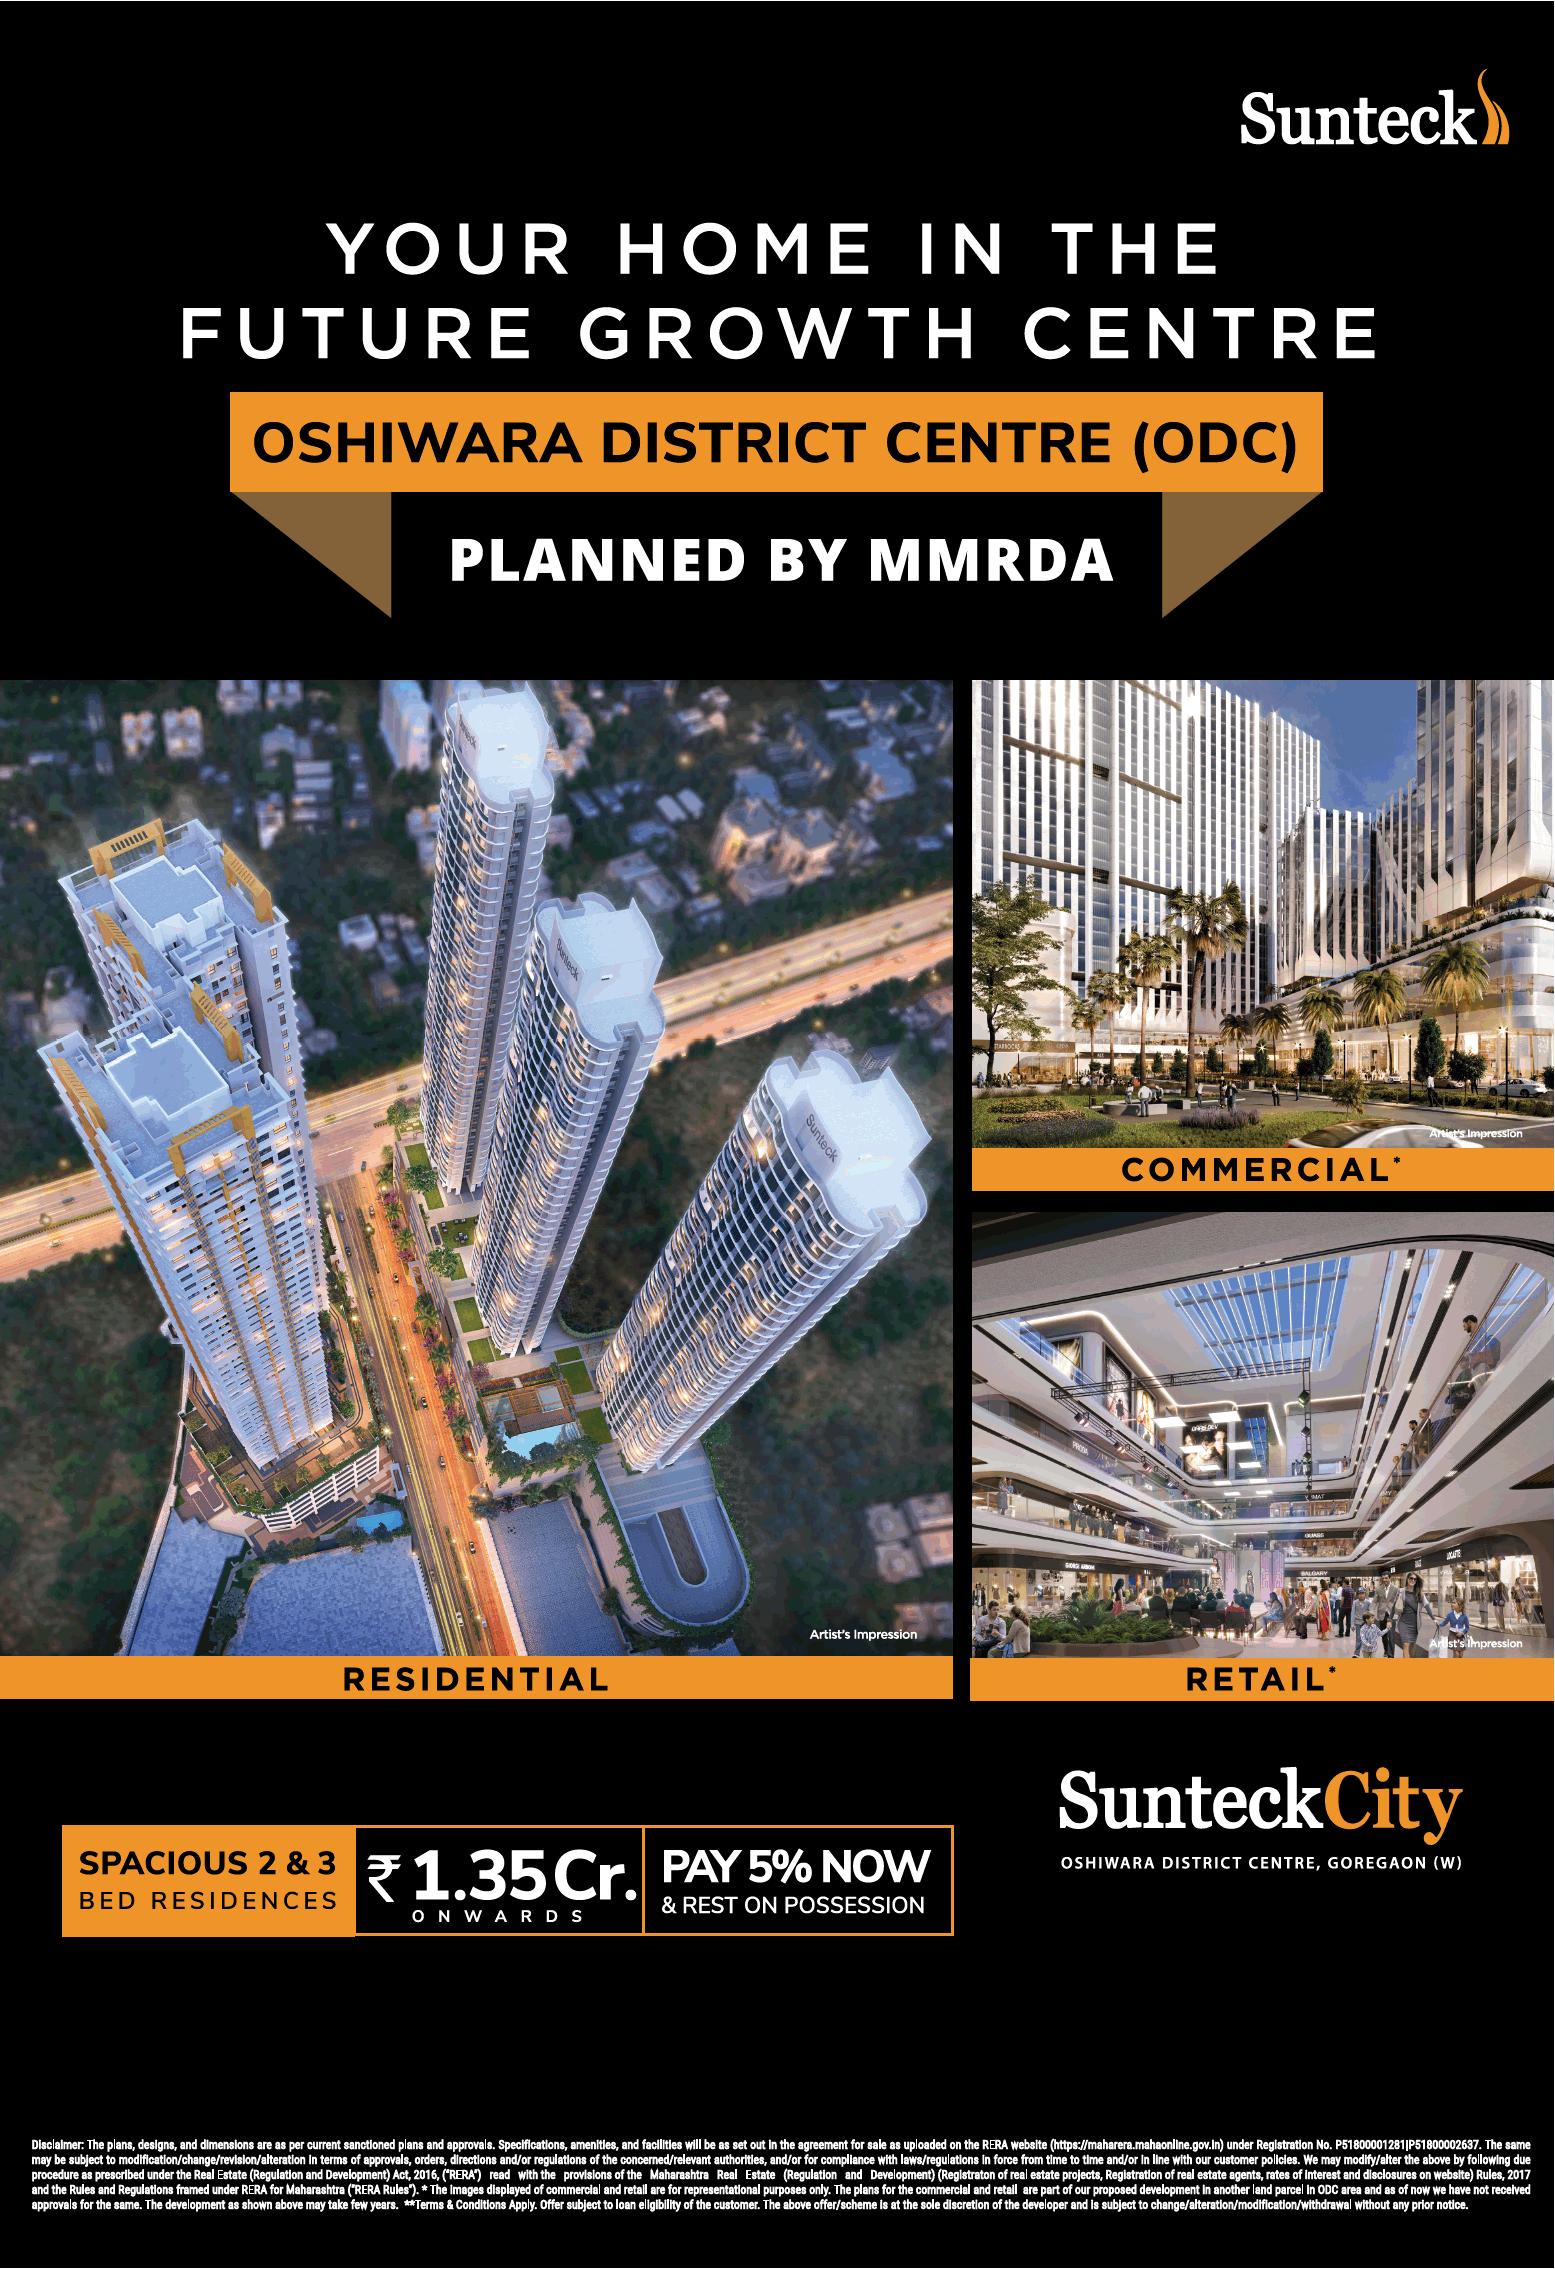 Pay 5% now & rest on possession at Sunteck City in Mumbai Update